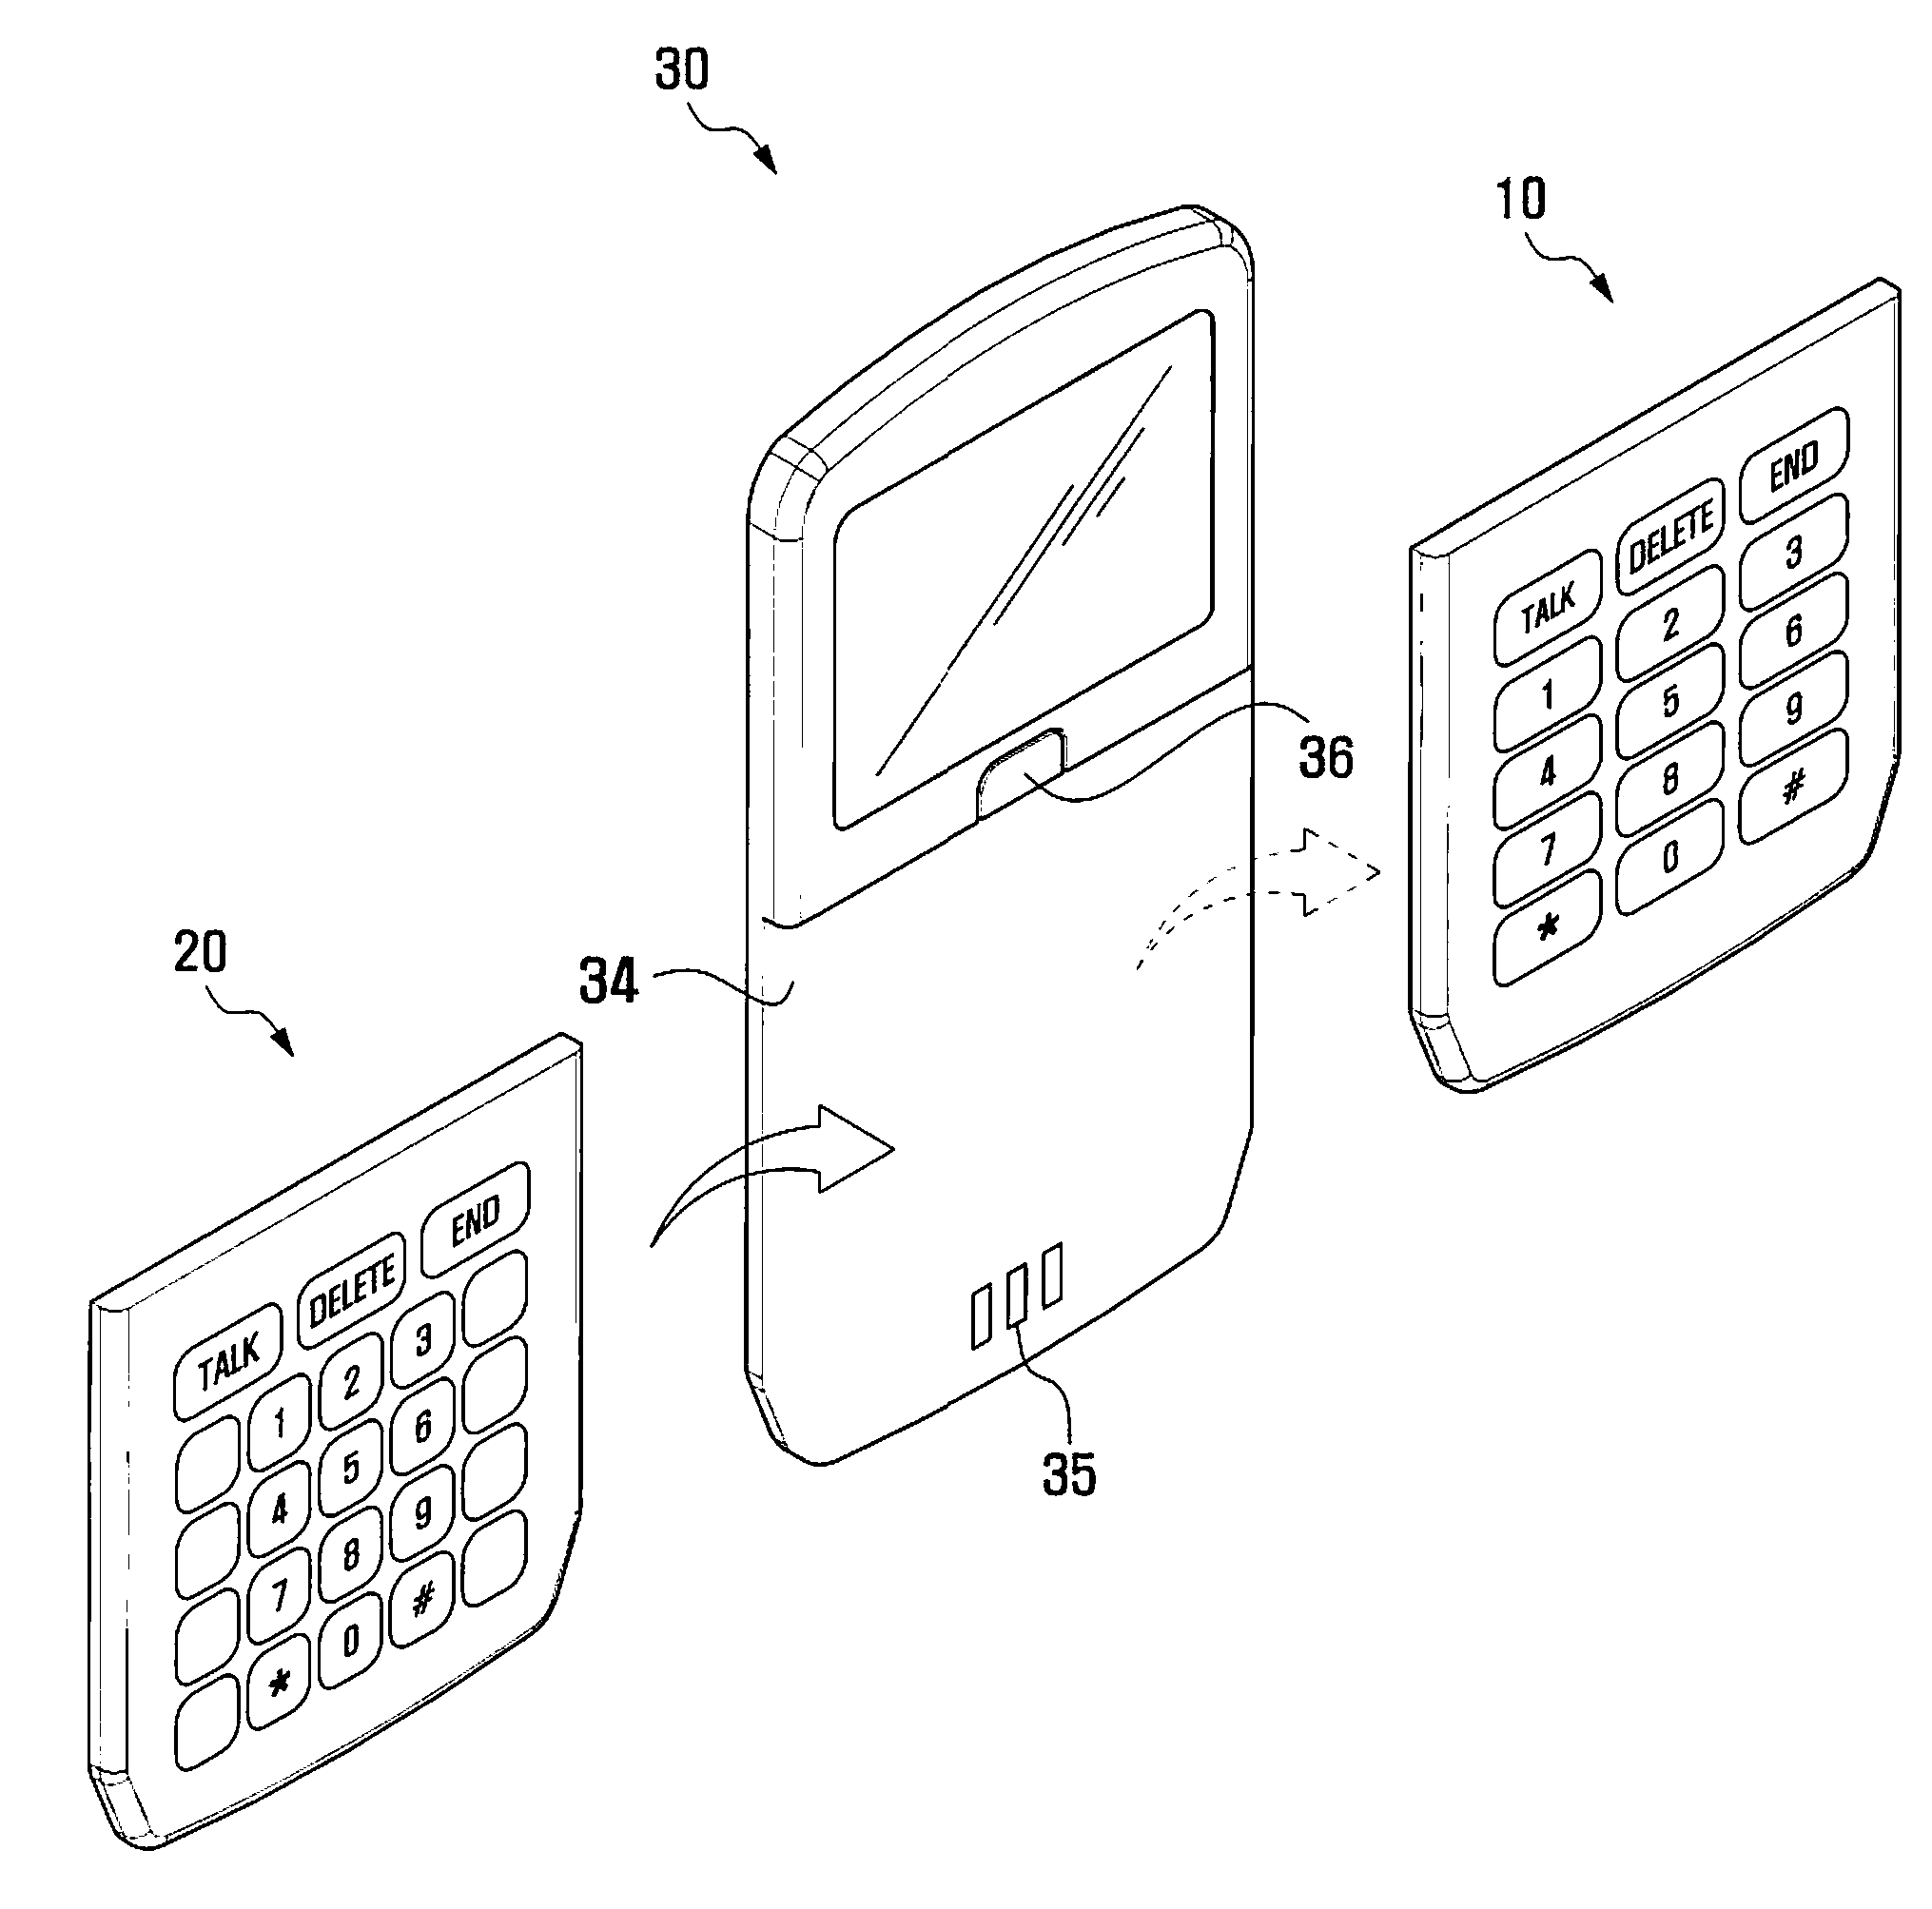 Keypad battery pack, mobile terminal available for different keypad battery packs, and method of changing keypad of mobile terminal